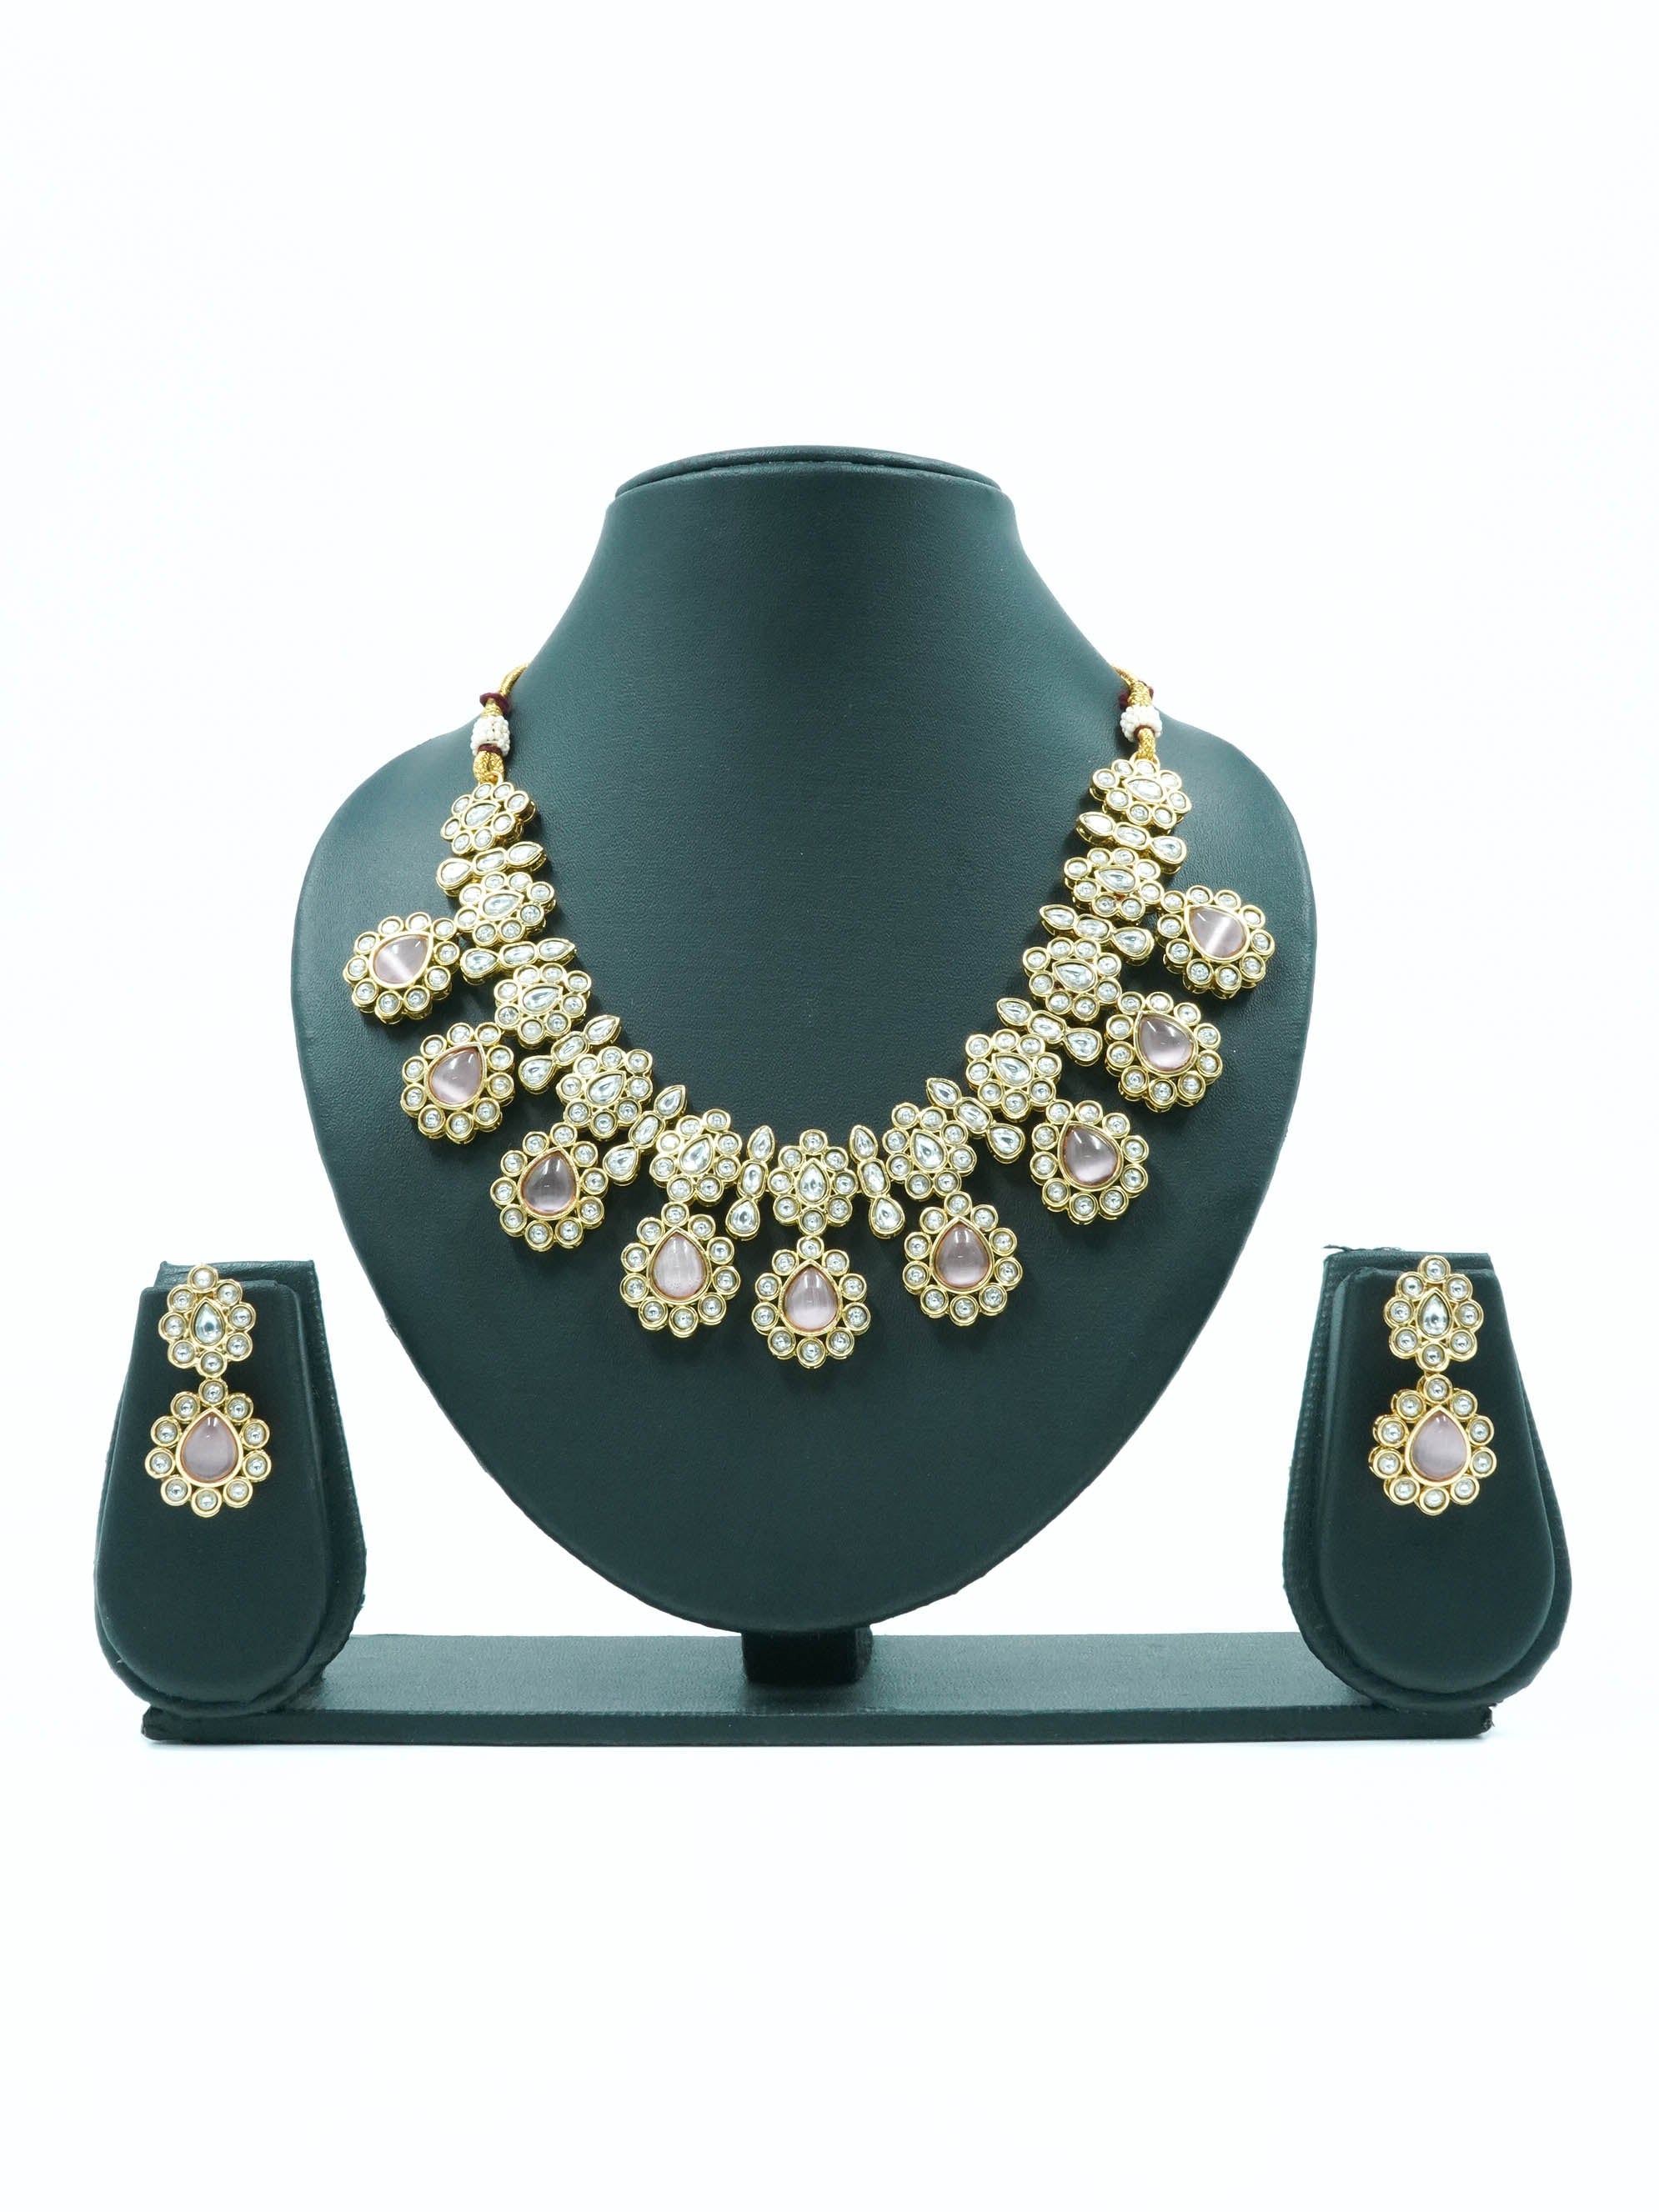 Premium Gold Polki Necklace Set with Colour Options 12575N